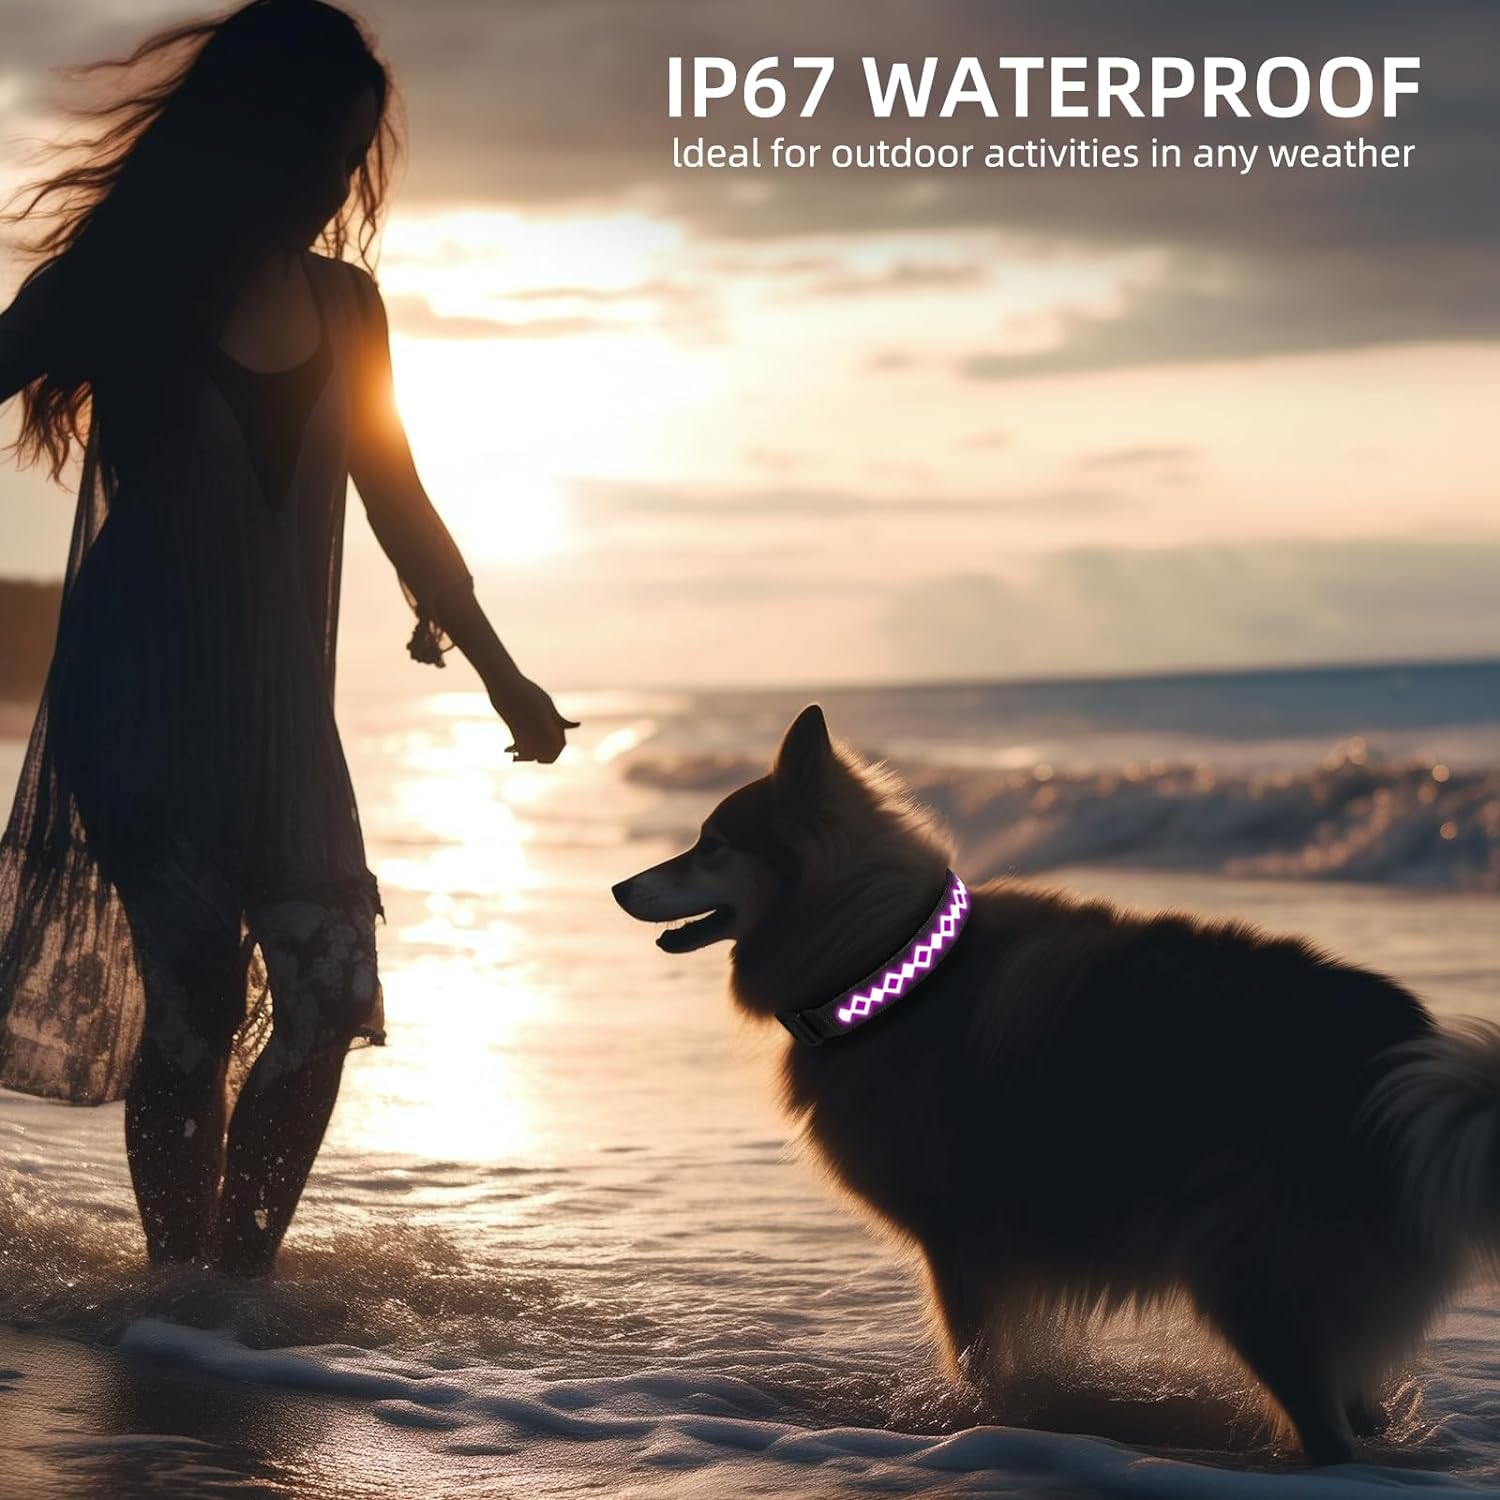 LED AirTag Dog Collar - Brightest Light Up Dog Collars - IP67 Waterproof Air Tag Dog Collar Holder - 1,600 Feet of High Visibility - USB C Rechargeable - Dog Lights for Night Walking